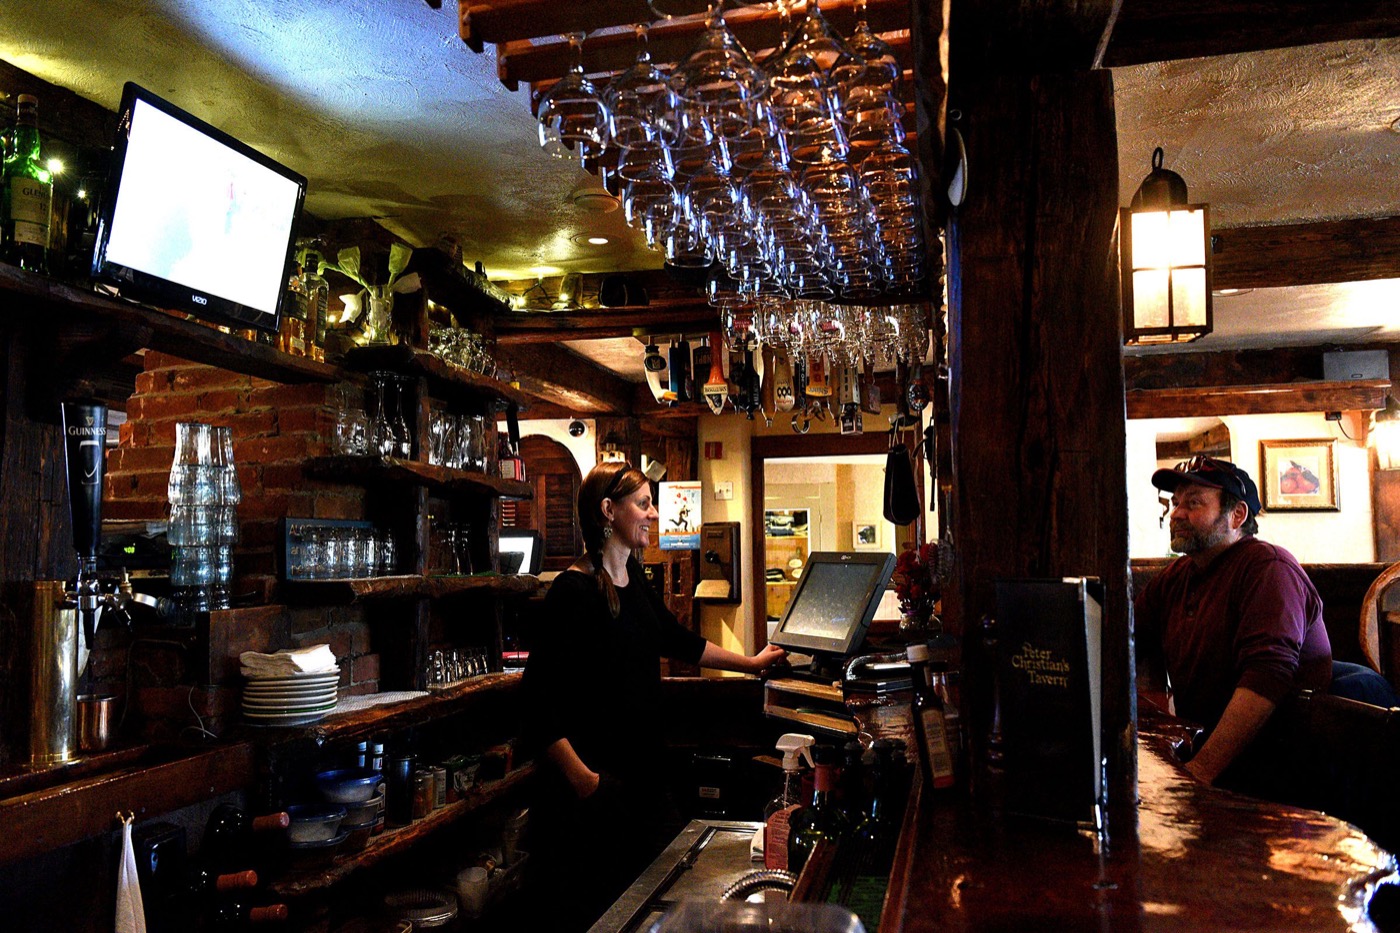 Peter Christian’s Tavern bartender Kati Lannon chats with customer Jay MacArthur, of Andover, N.H., on March 2, 2017, in New London, N.H. MacArthur said he has been through five owners of the tavern. (Valley News - Jennifer Hauck) Copyright Valley News. May not be reprinted or used online without permission. Send requests to permission@vnews.com.